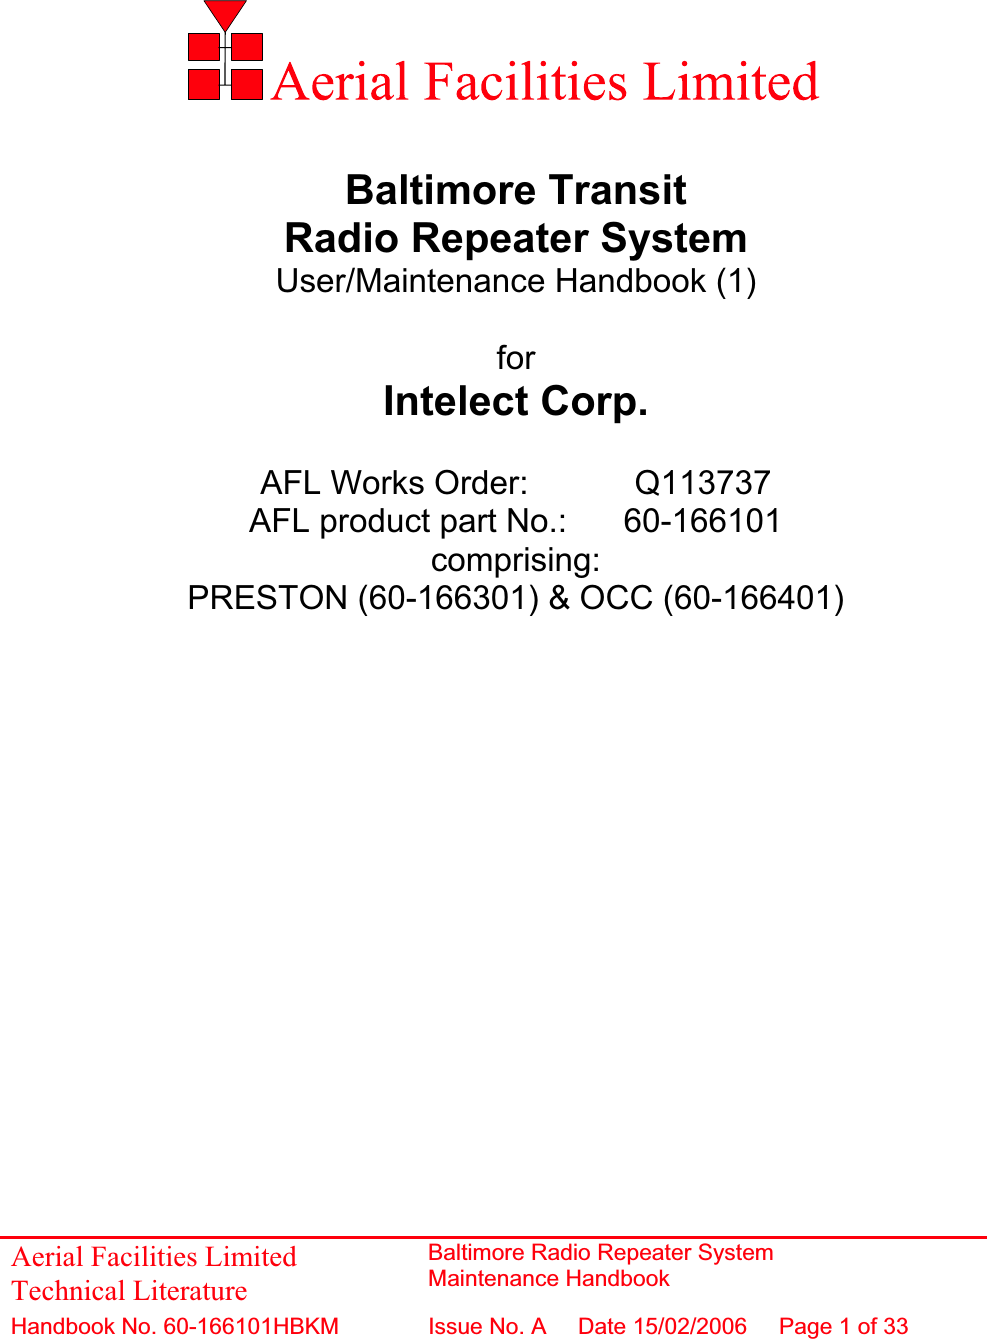 Baltimore Transit Radio Repeater System User/Maintenance Handbook (1) forIntelect Corp. AFL Works Order:    Q113737 AFL product part No.:  60-166101 comprising:PRESTON (60-166301) &amp; OCC (60-166401) Aerial Facilities Limited Technical Literature Baltimore Radio Repeater System Maintenance HandbookHandbook No. 60-166101HBKM Issue No. A  Date 15/02/2006 Page 1 of 33 